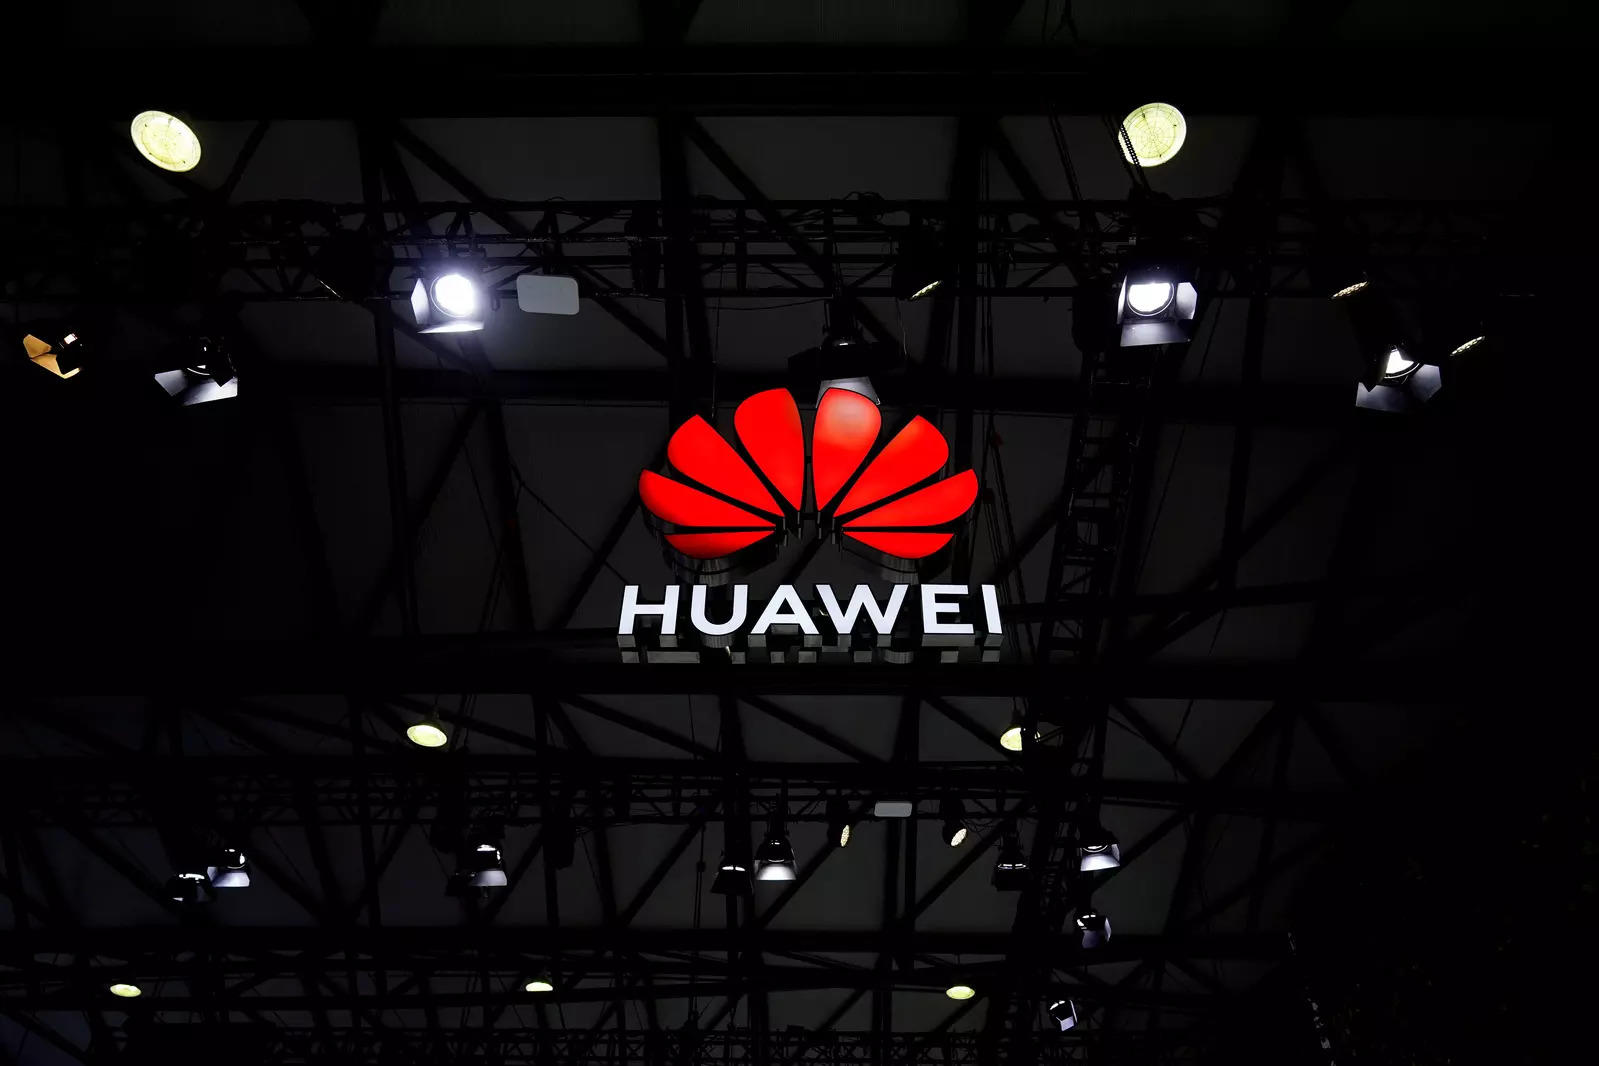  FILE PHOTO: A Huawei logo is seen at the Mobile World Congress (MWC) in Shanghai, China February 23, 2021. REUTERS/Aly Song